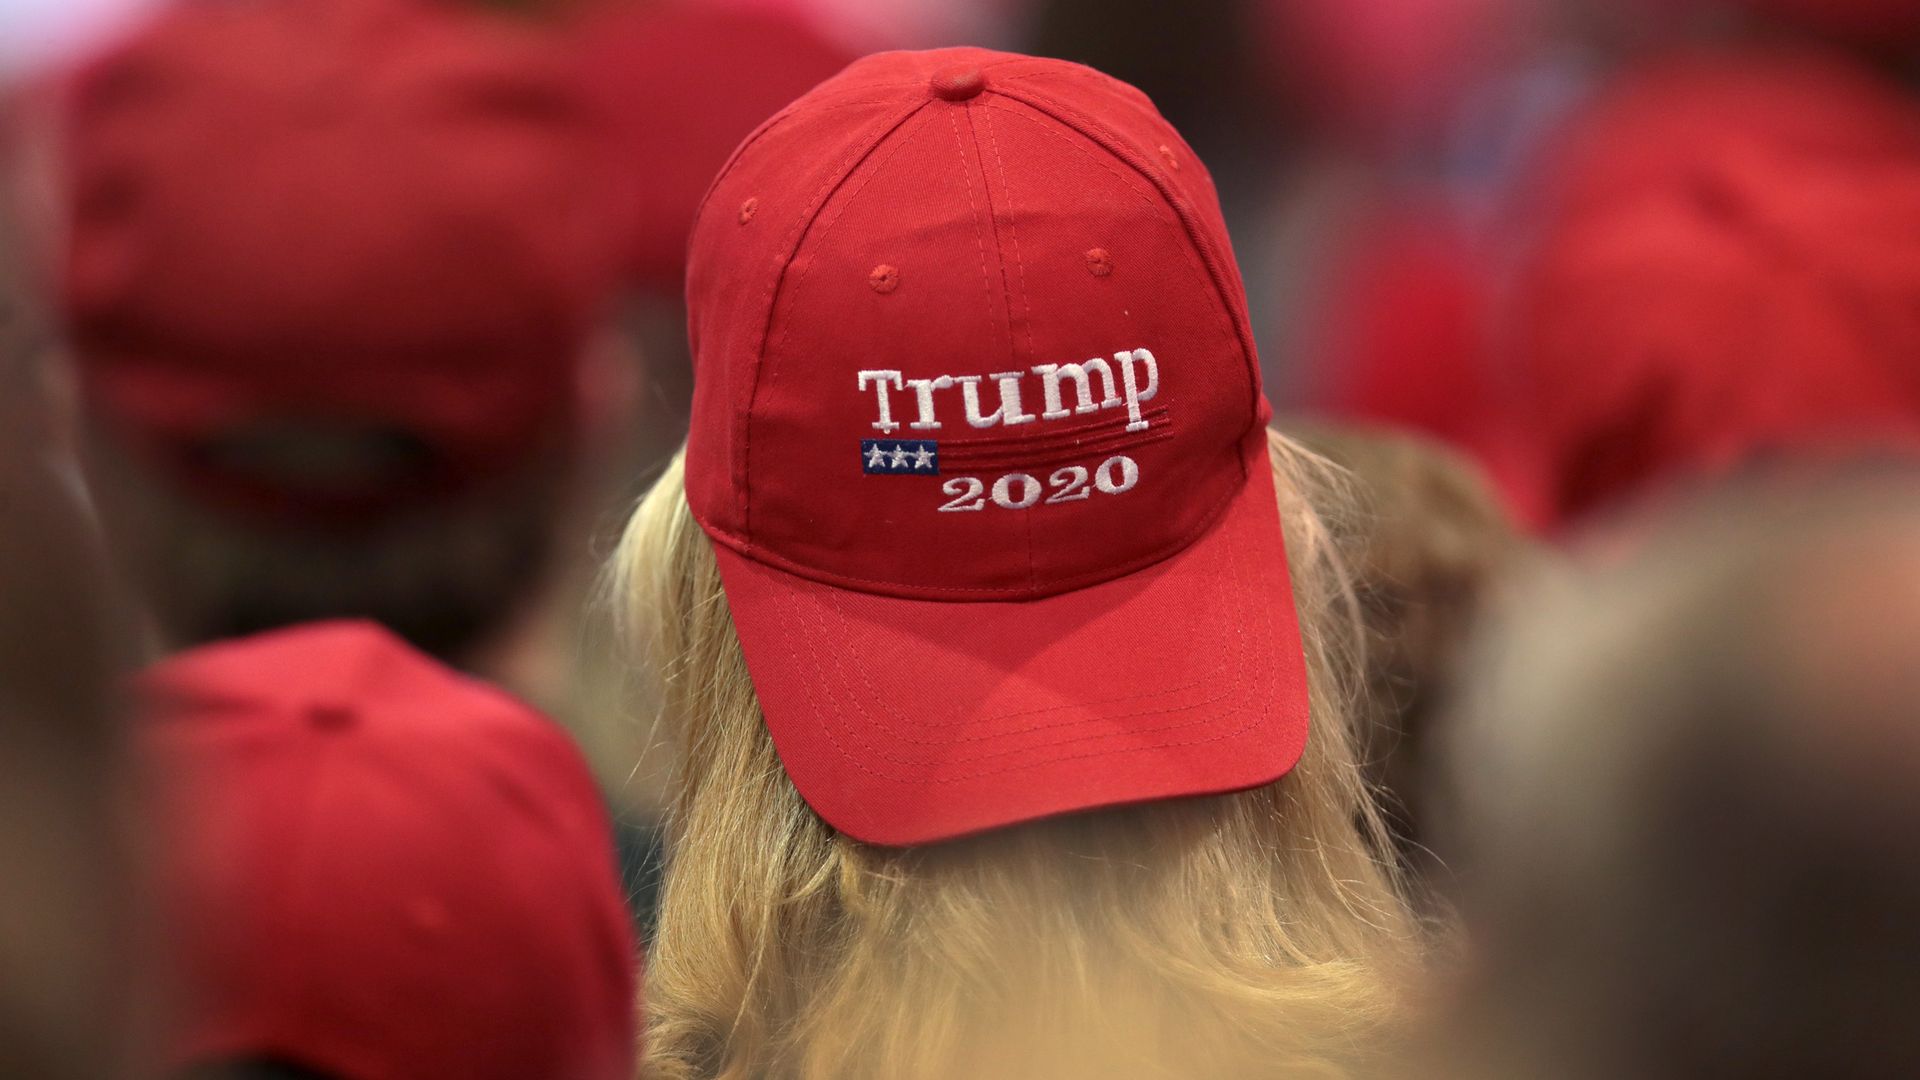 Trump supporter wearing a 2020 hat